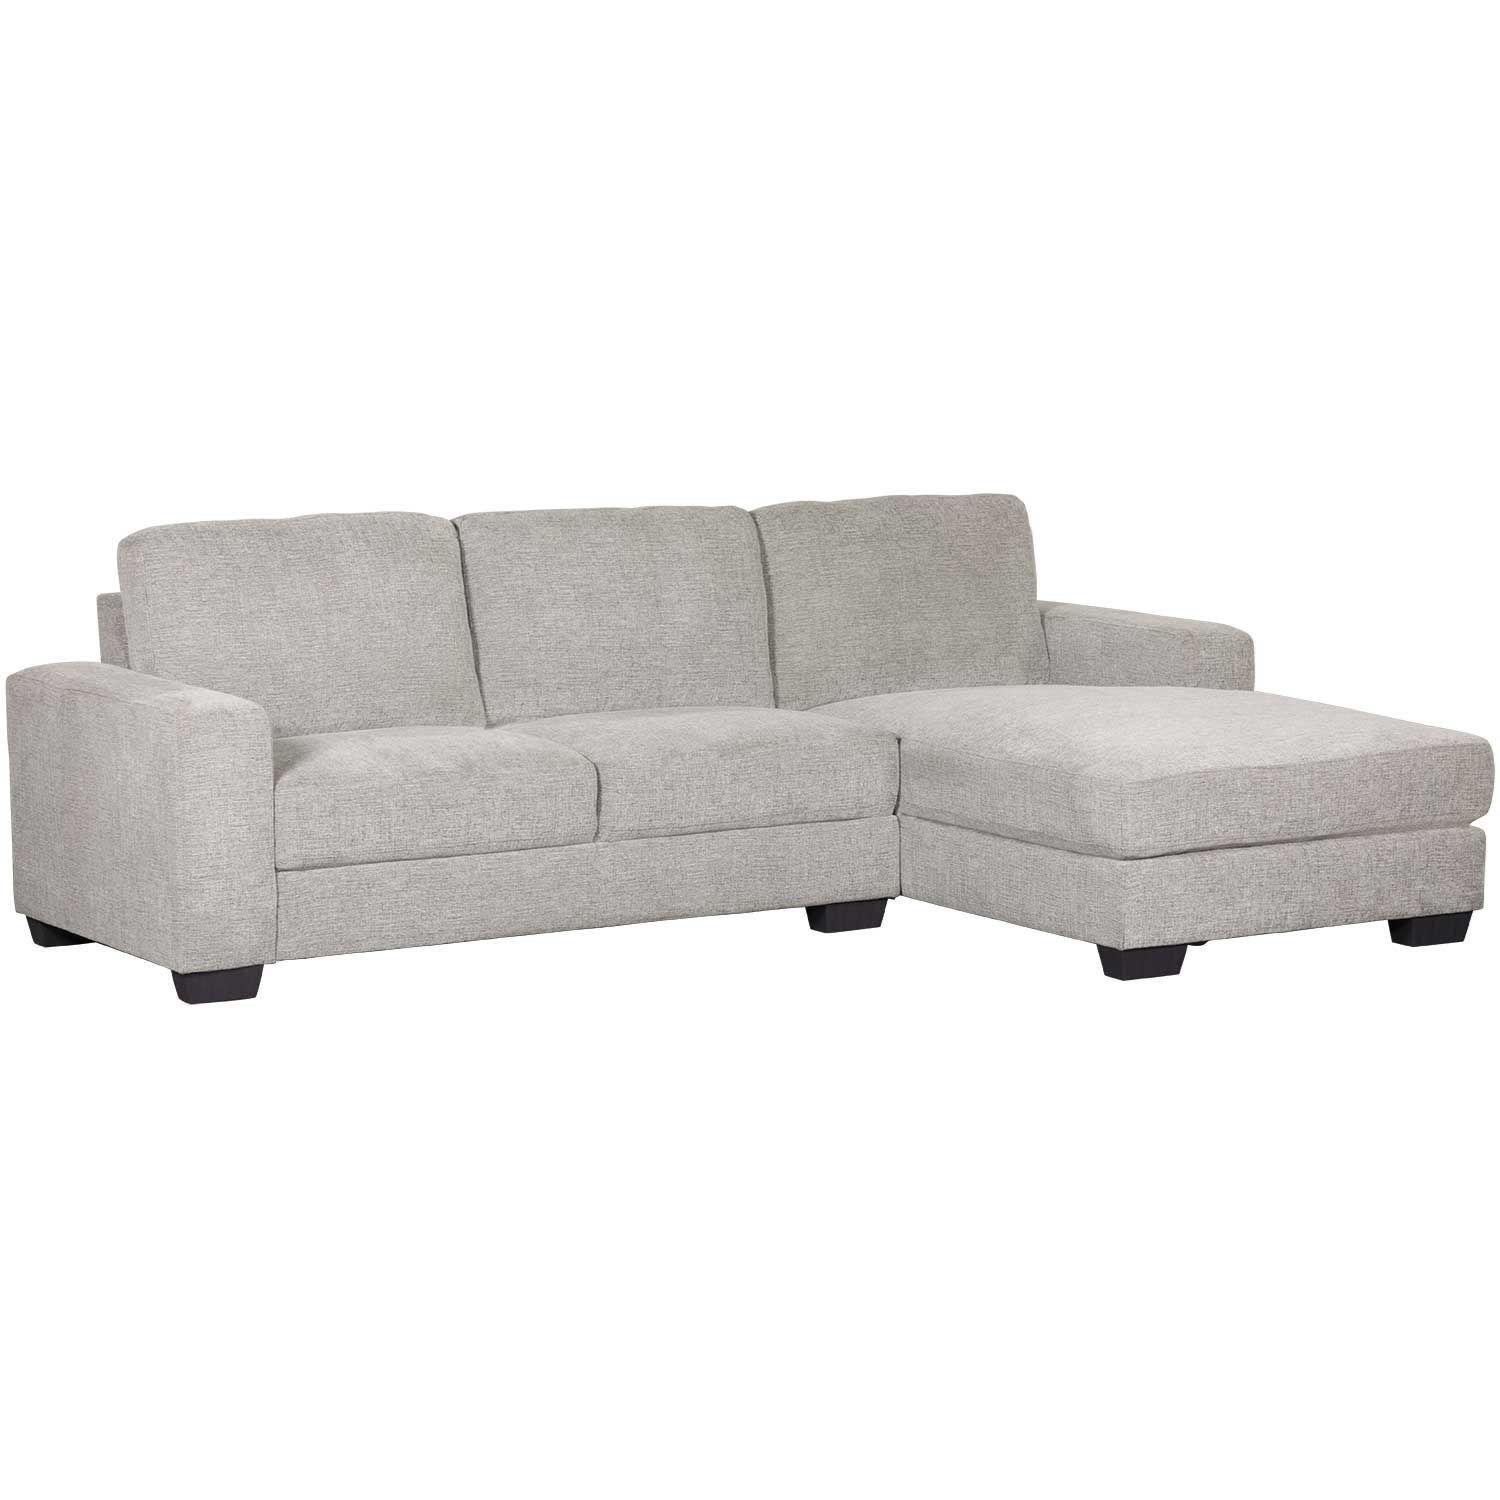 Charleston Dark Gray 2 Piece Sectional | | Lifestyle Regarding 2pc Crowningshield Contemporary Chaise Sofas Light Gray (View 13 of 15)